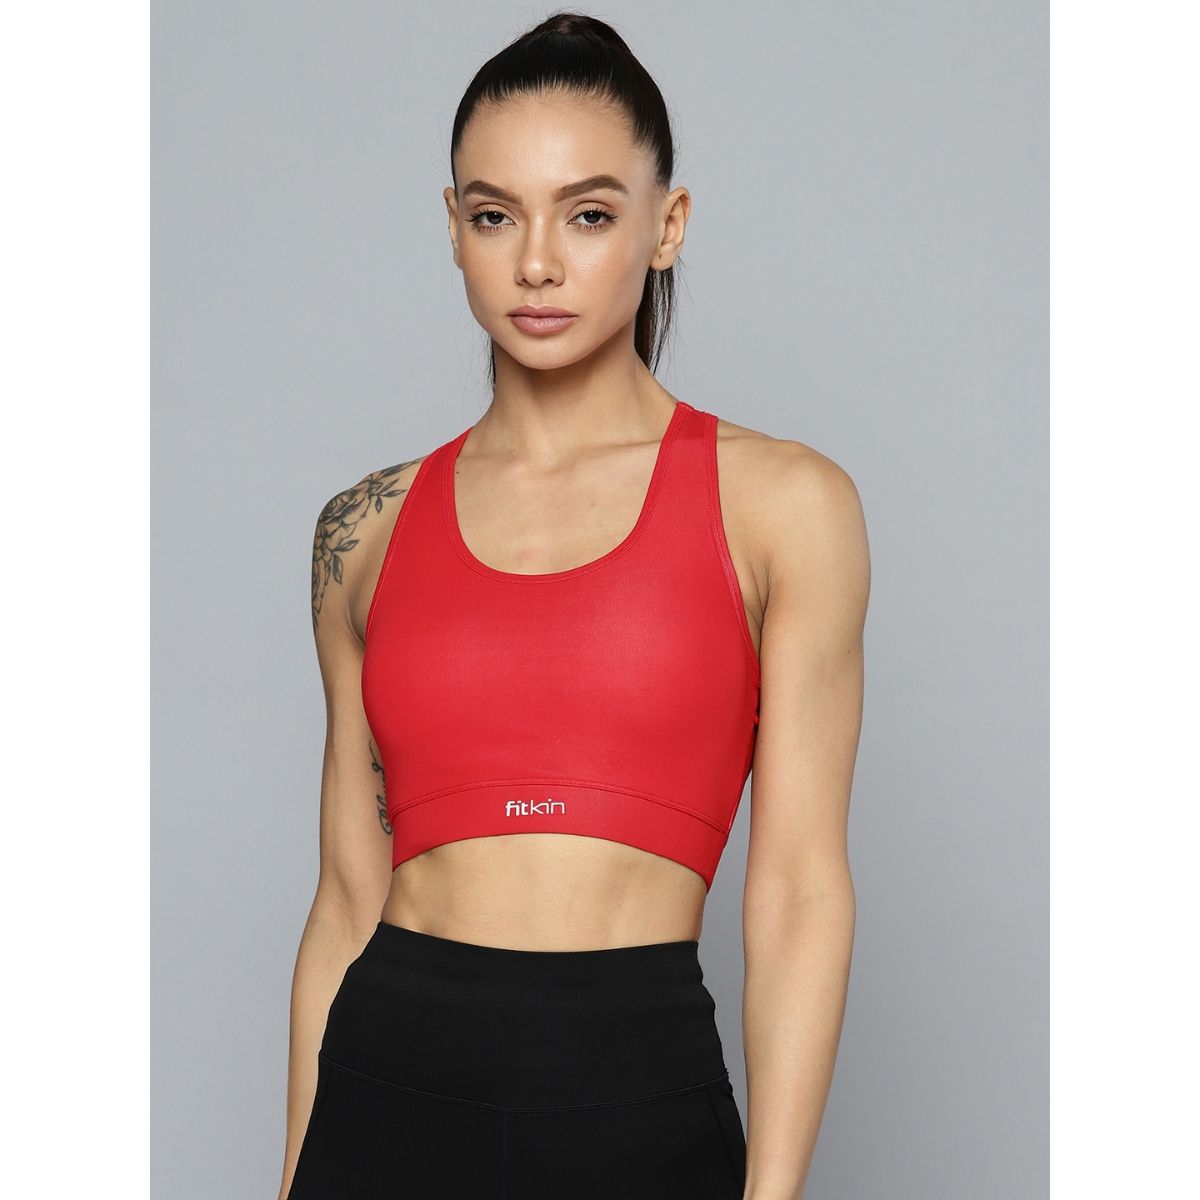 Fitkin Red Medium Impact Sports Bra With Back Mesh Buy Fitkin Red Medium Impact Sports Bra With